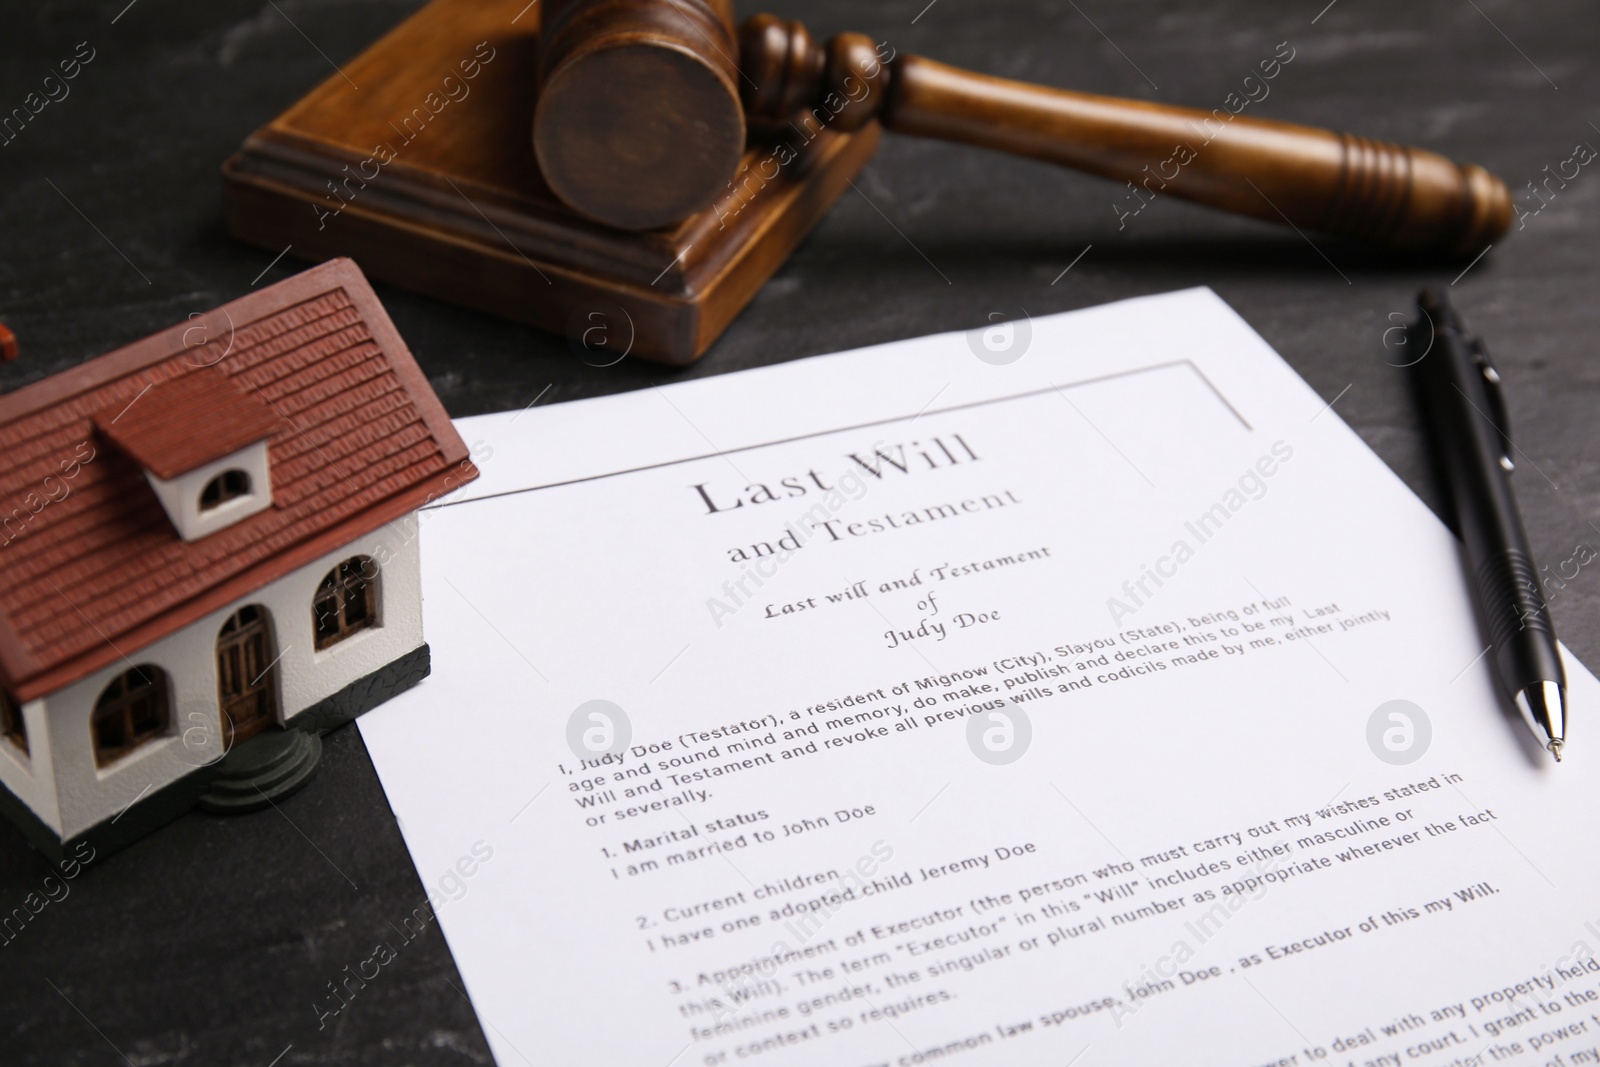 Photo of Last will and testament near house model, pen, gavel on black table, closeup